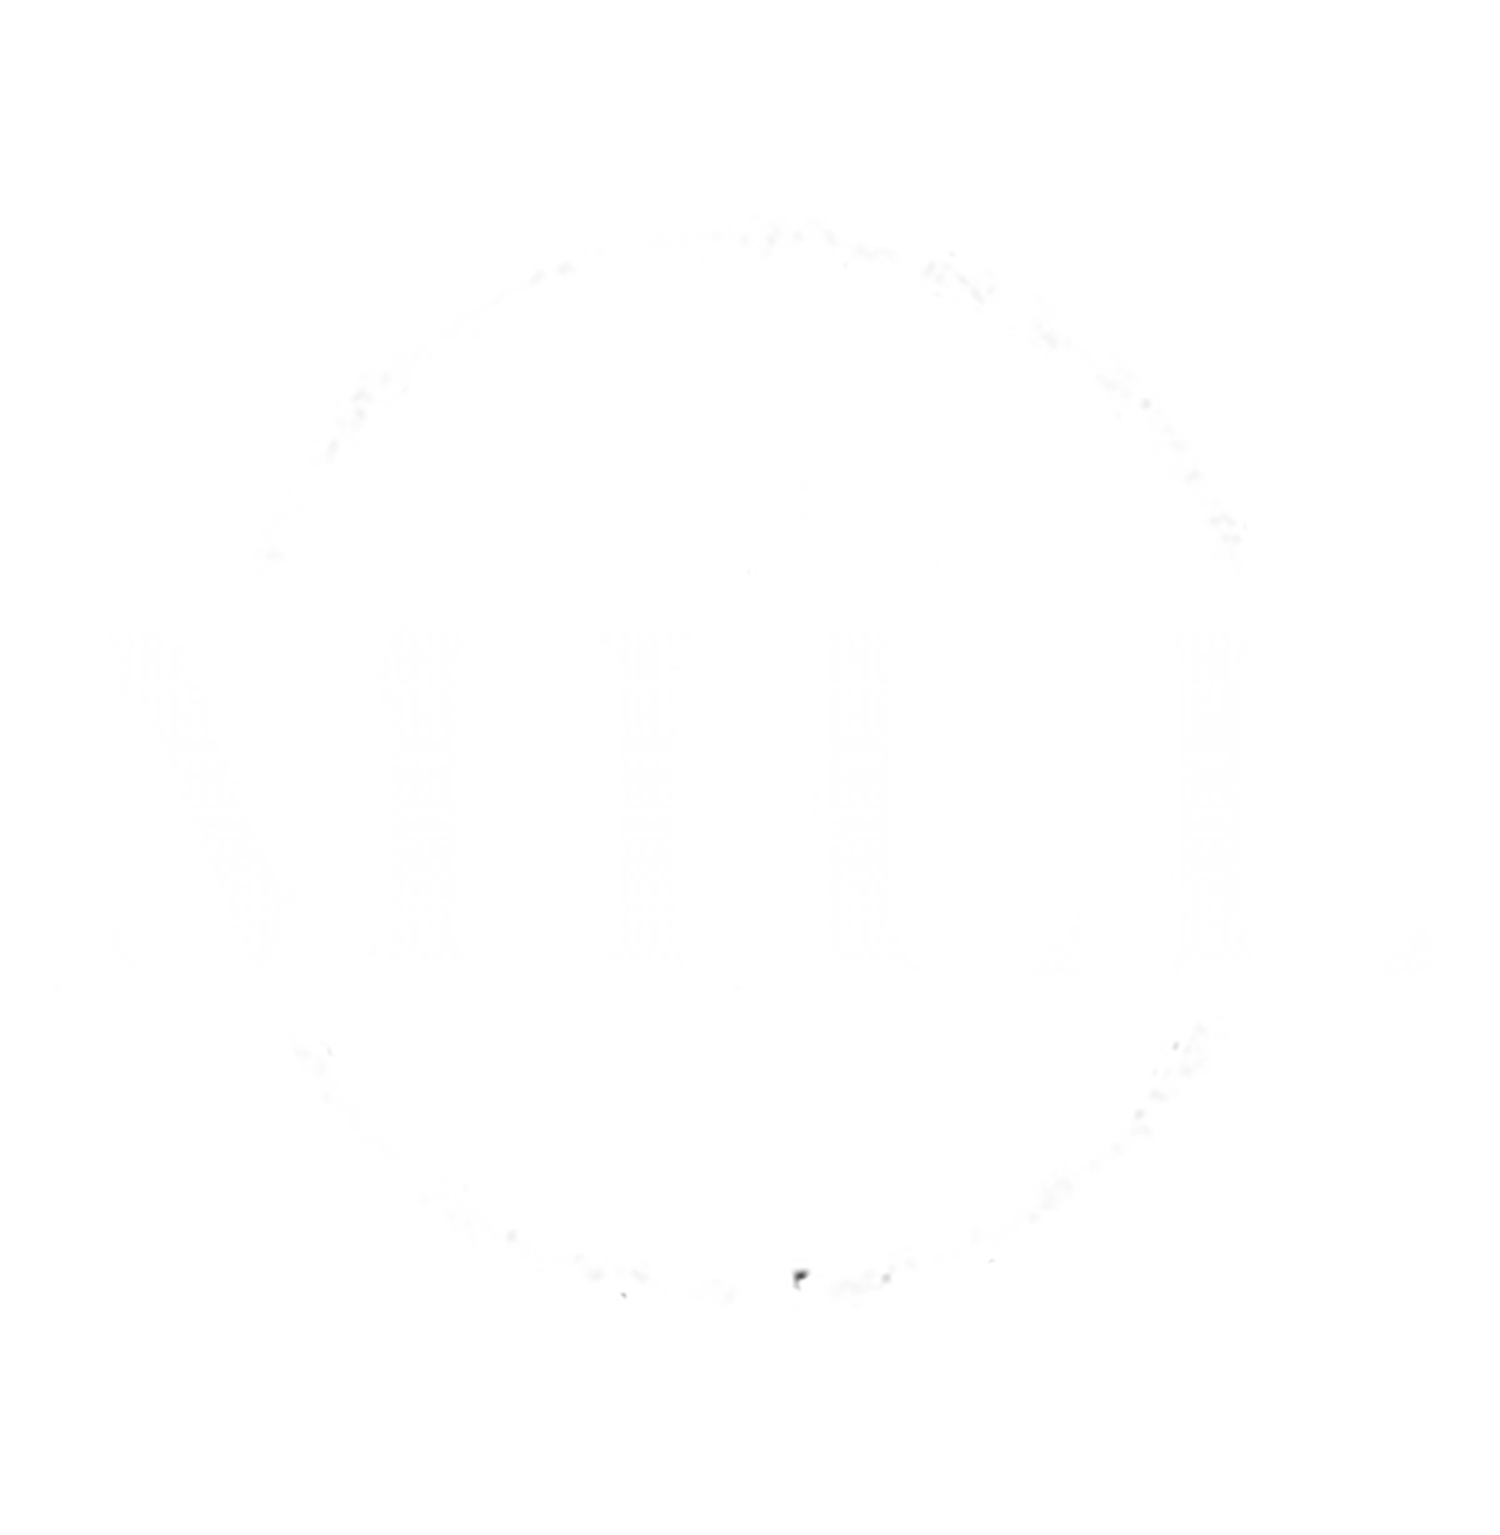 THE MILL